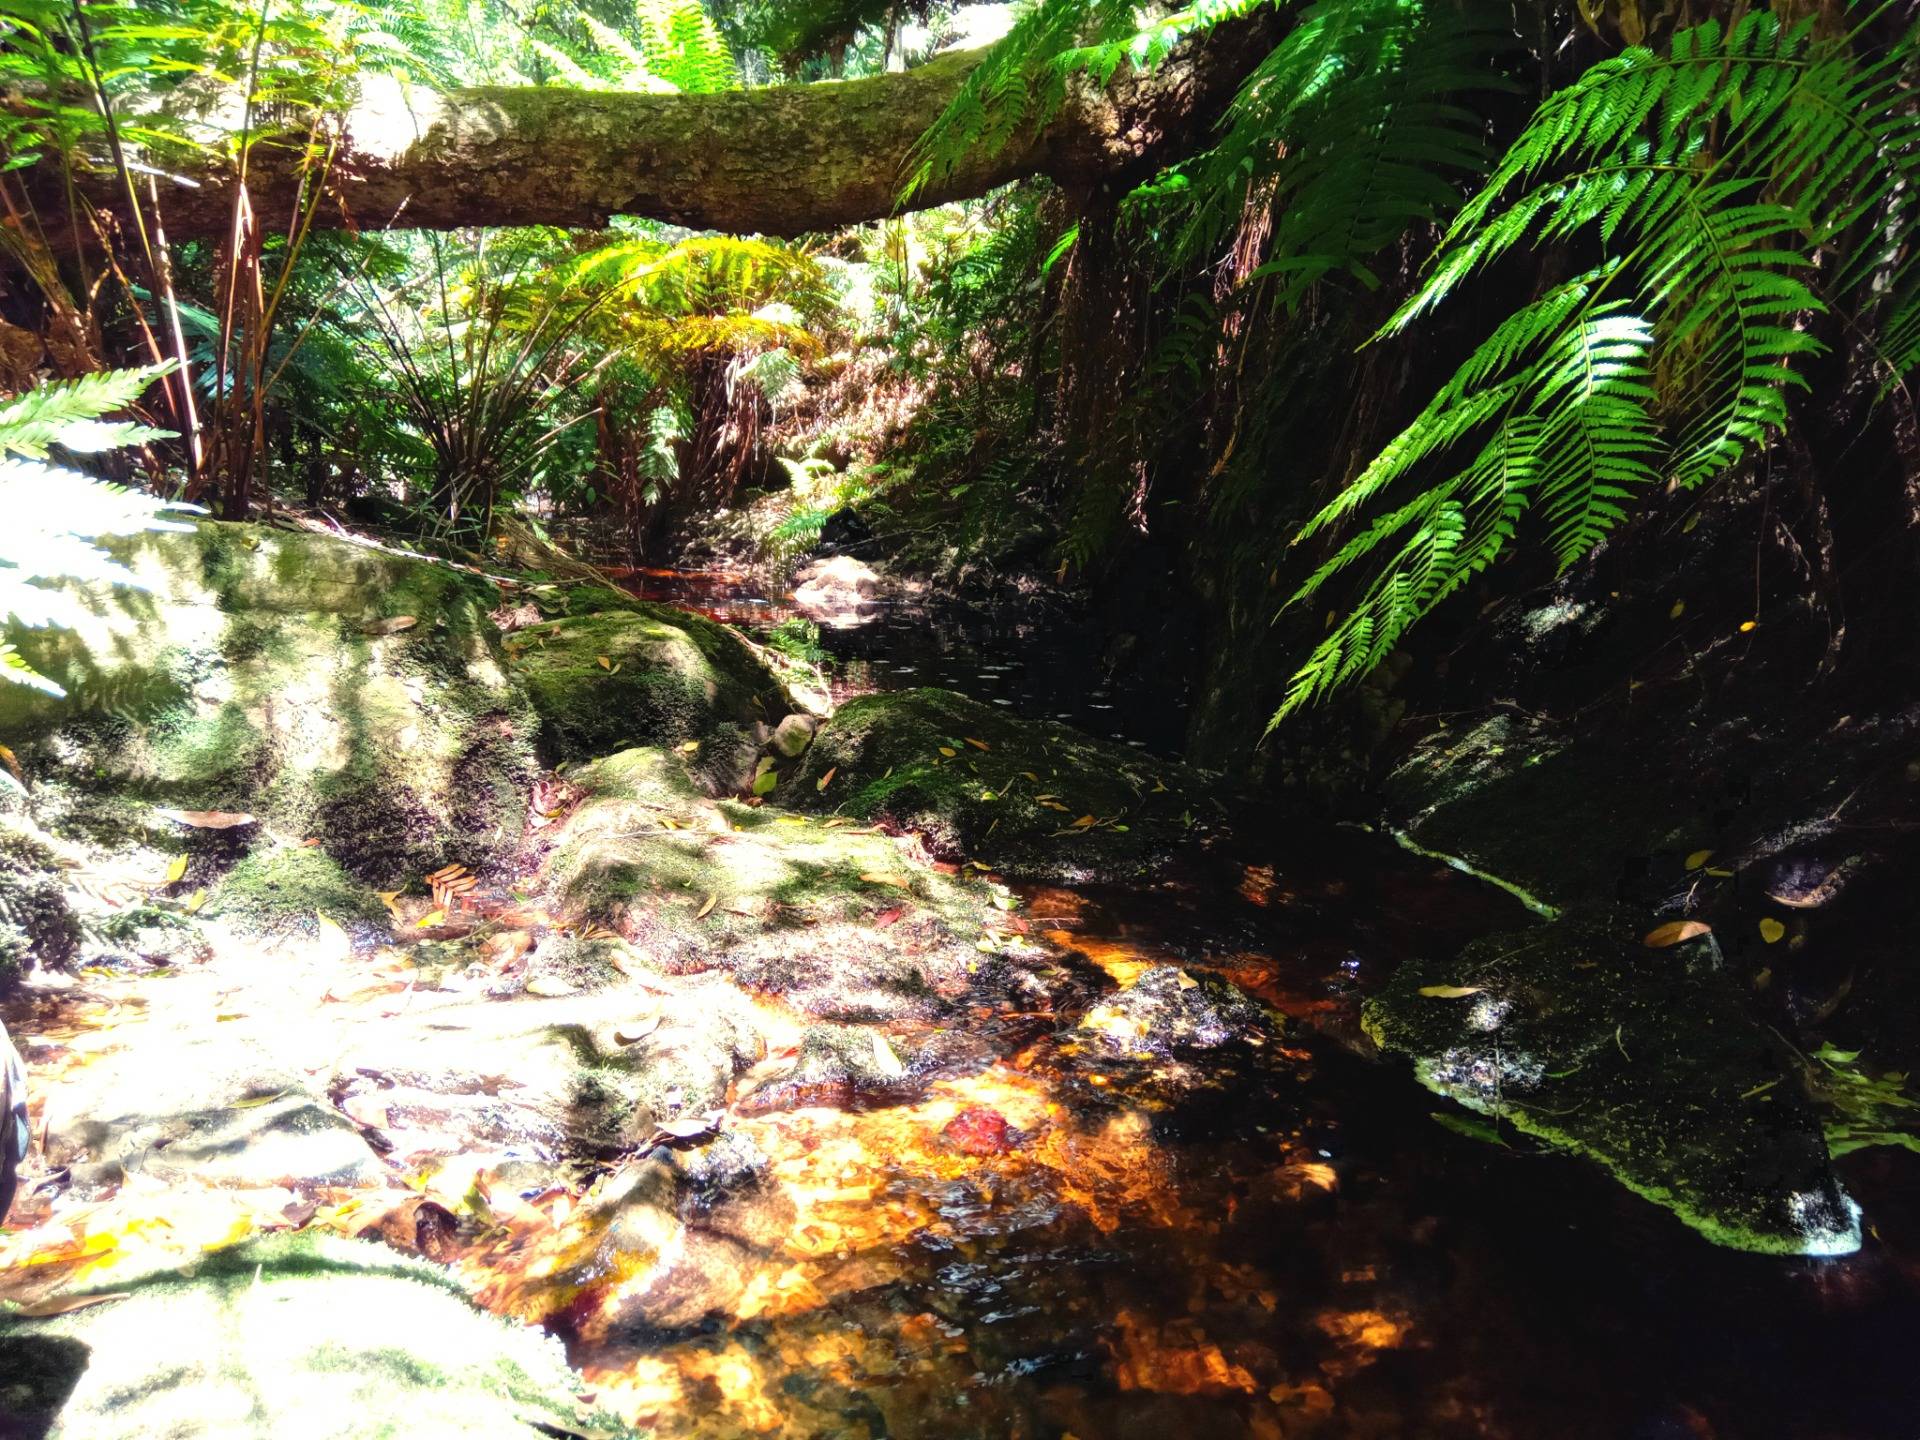 Golden streams surrounded by lush indigenous vegetation.